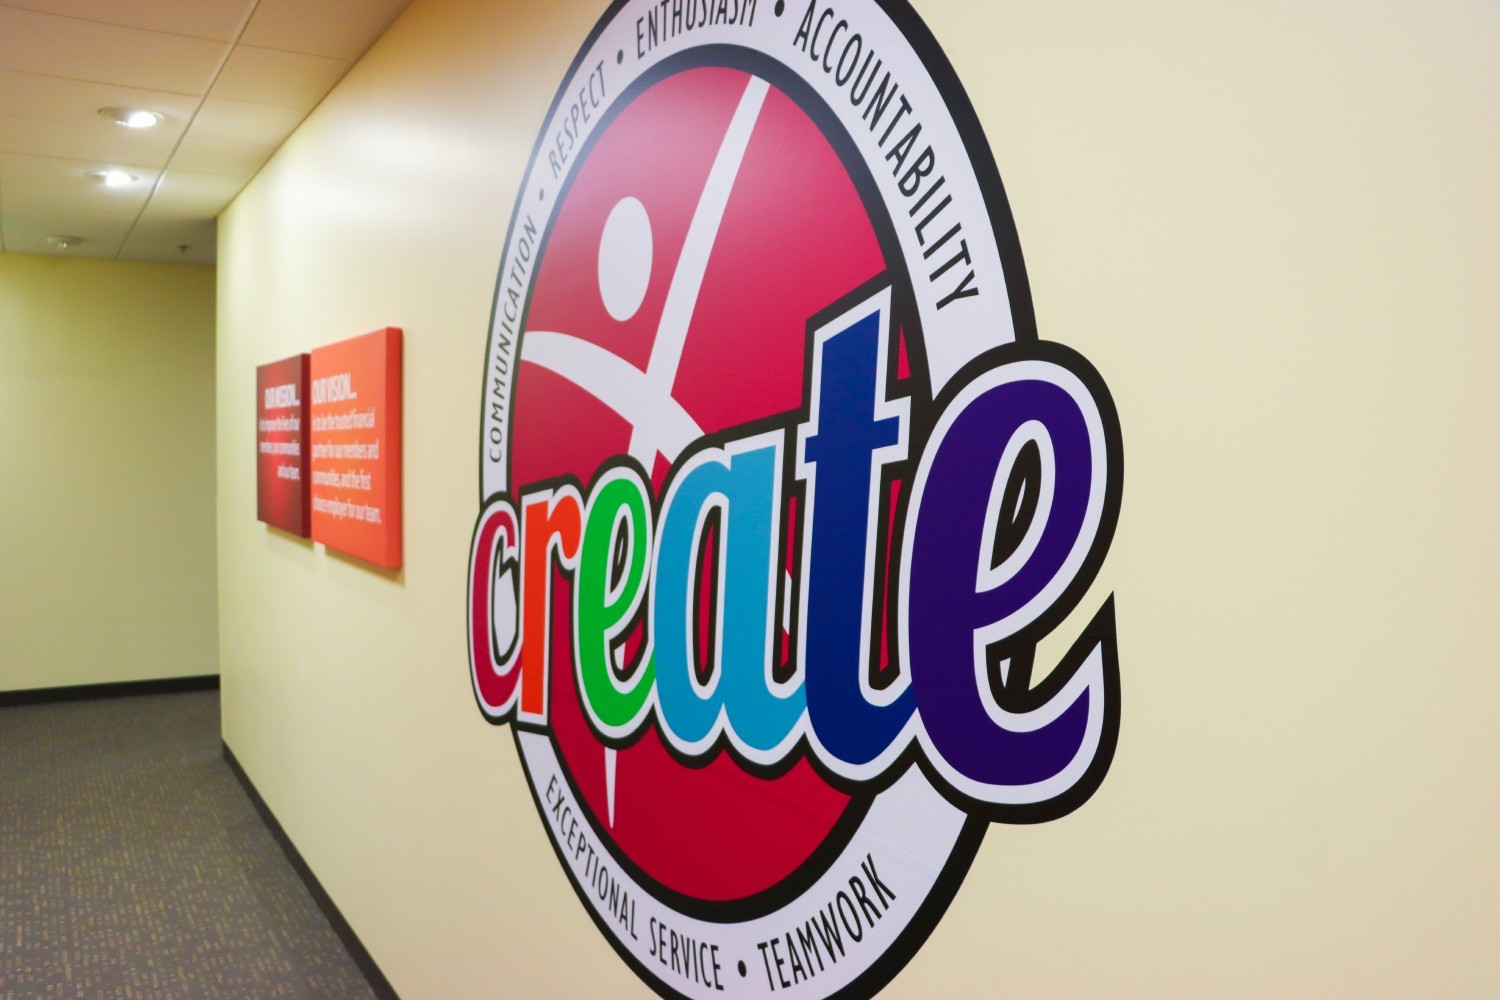 Our CREATE values: Communication, Respect, Enthusiasm, Accountability, Teamwork, and Exceptional Service.